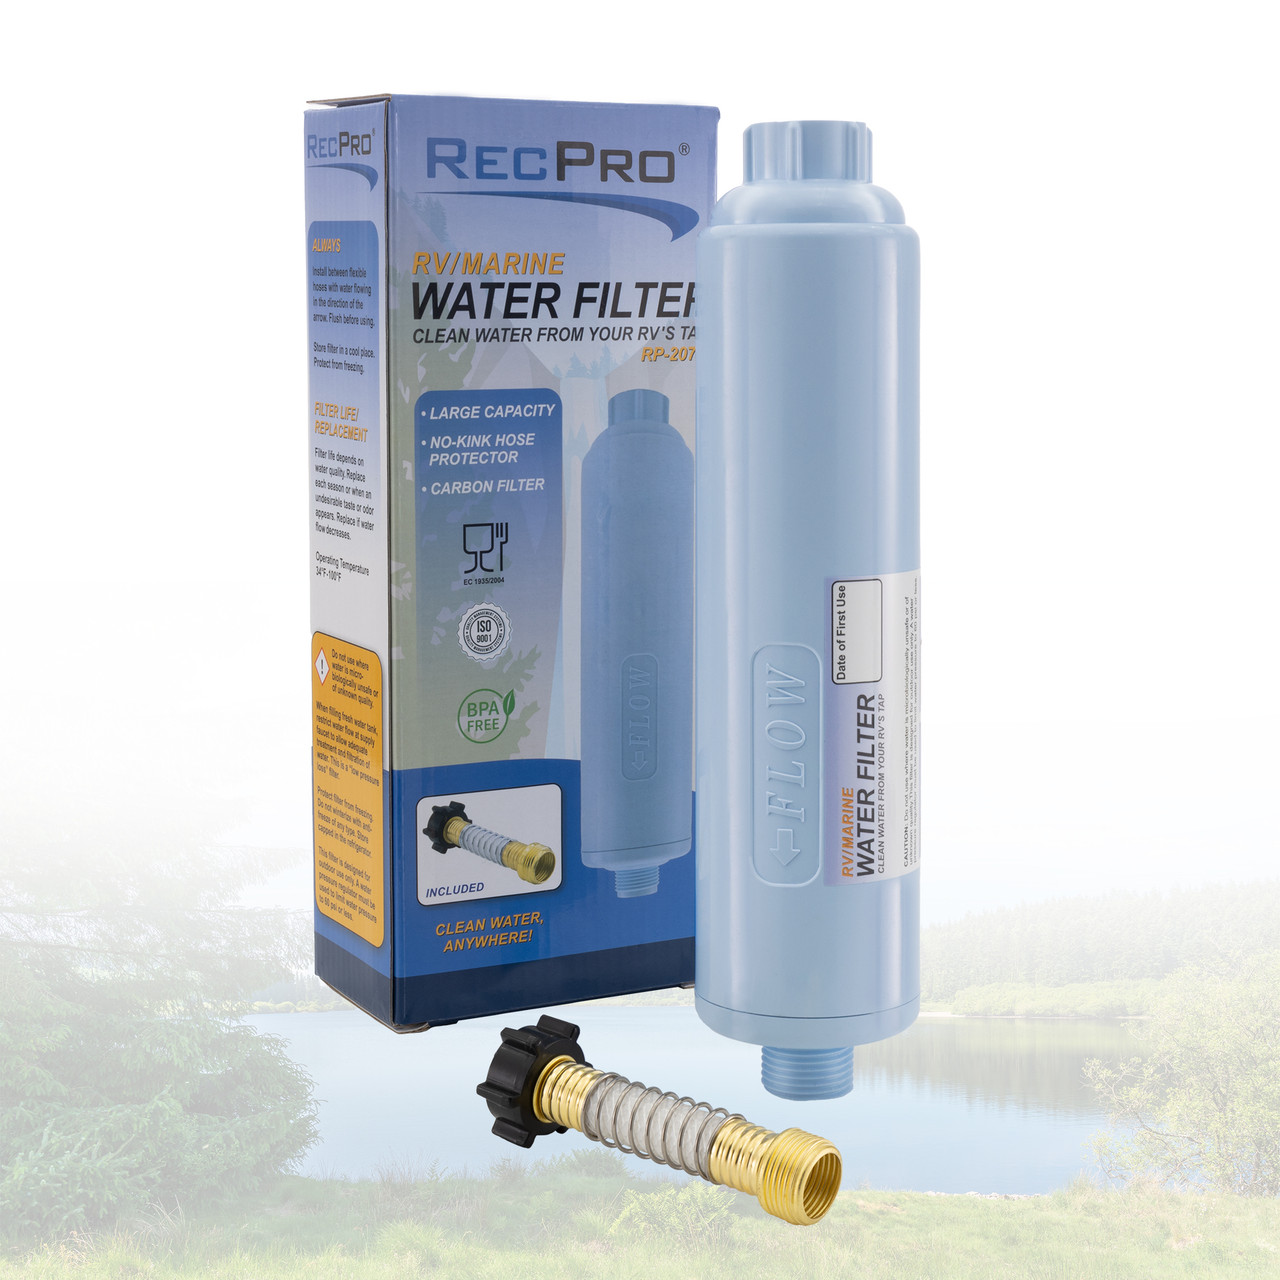 TastePURE RV Water Filter with Hose Flexible Protector 